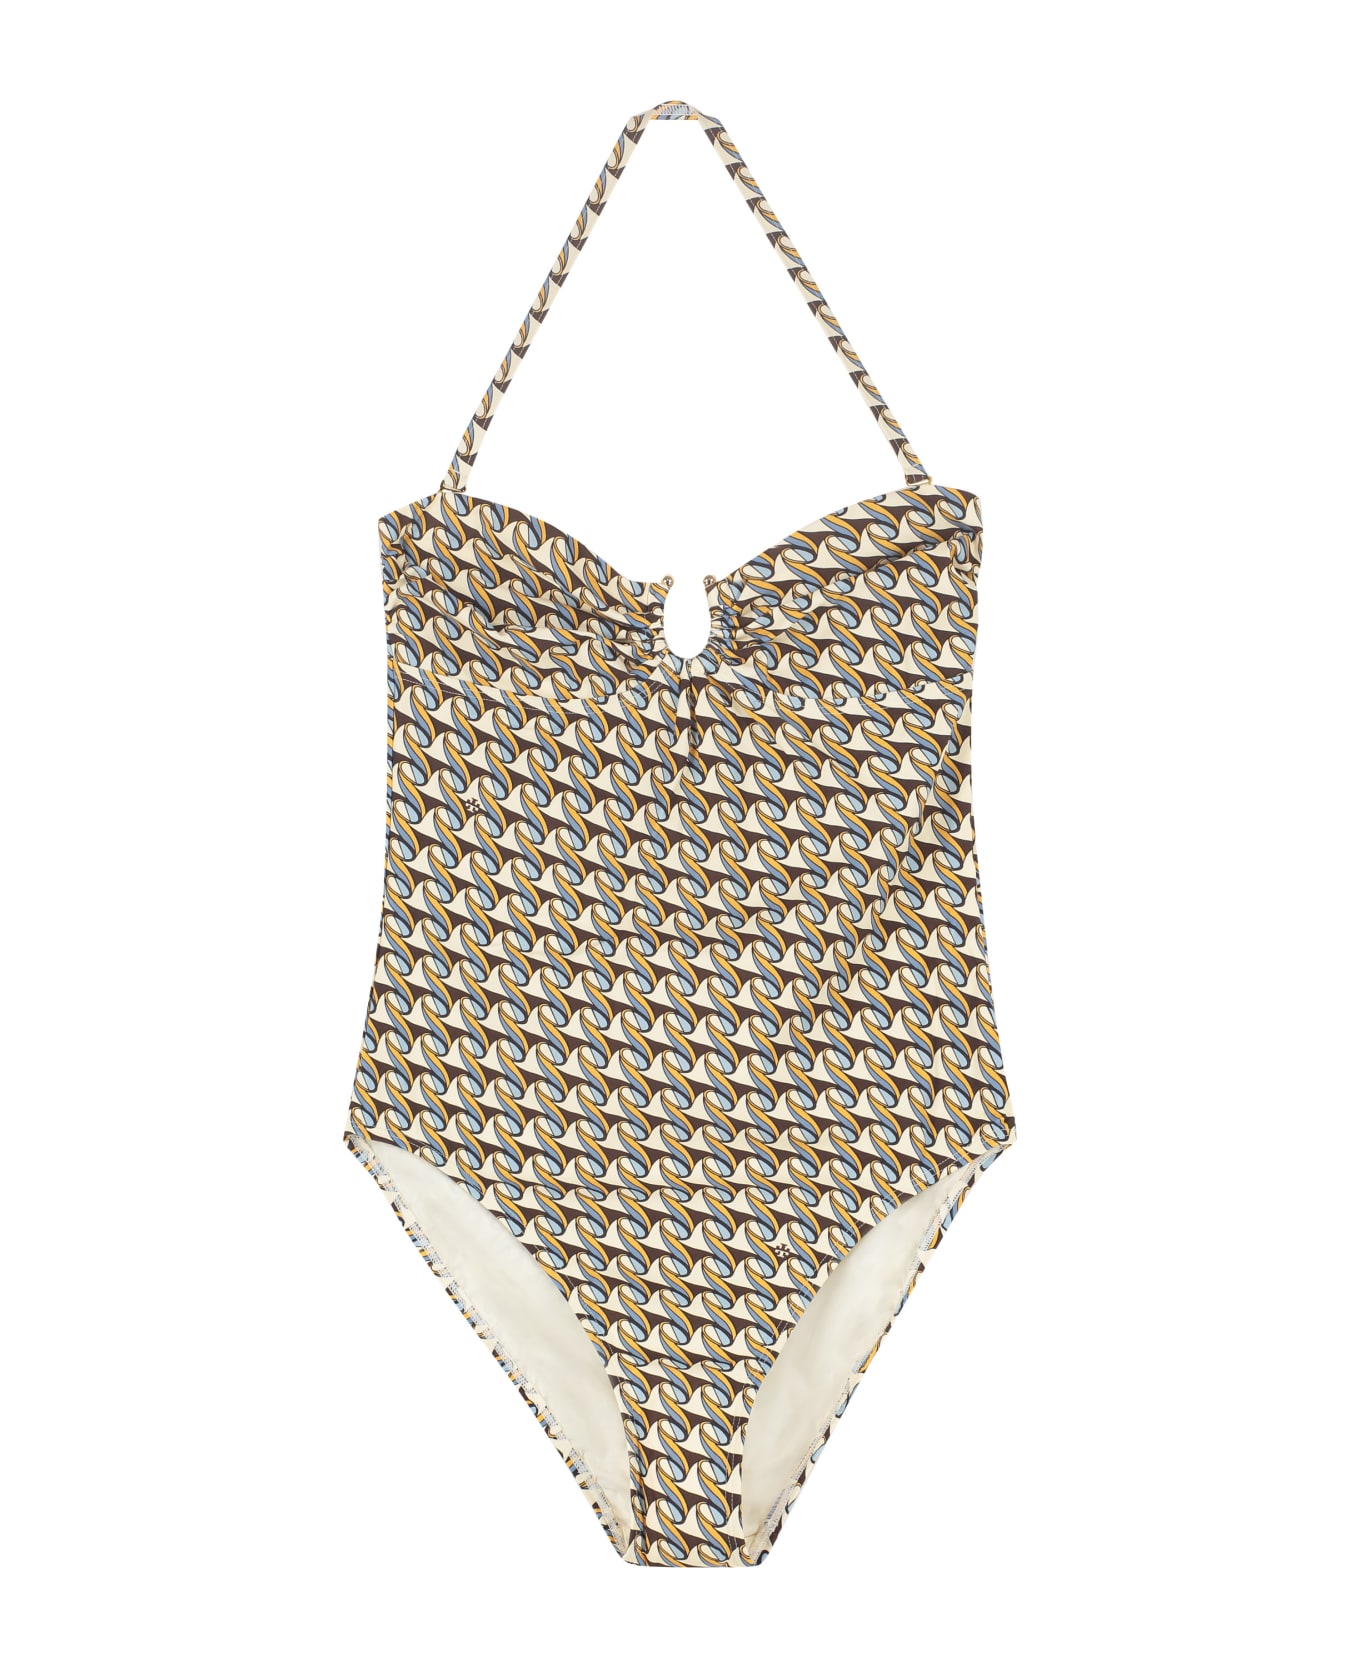 Tory Burch Printed One-piece Swimsuit - BEIGE ワンピース